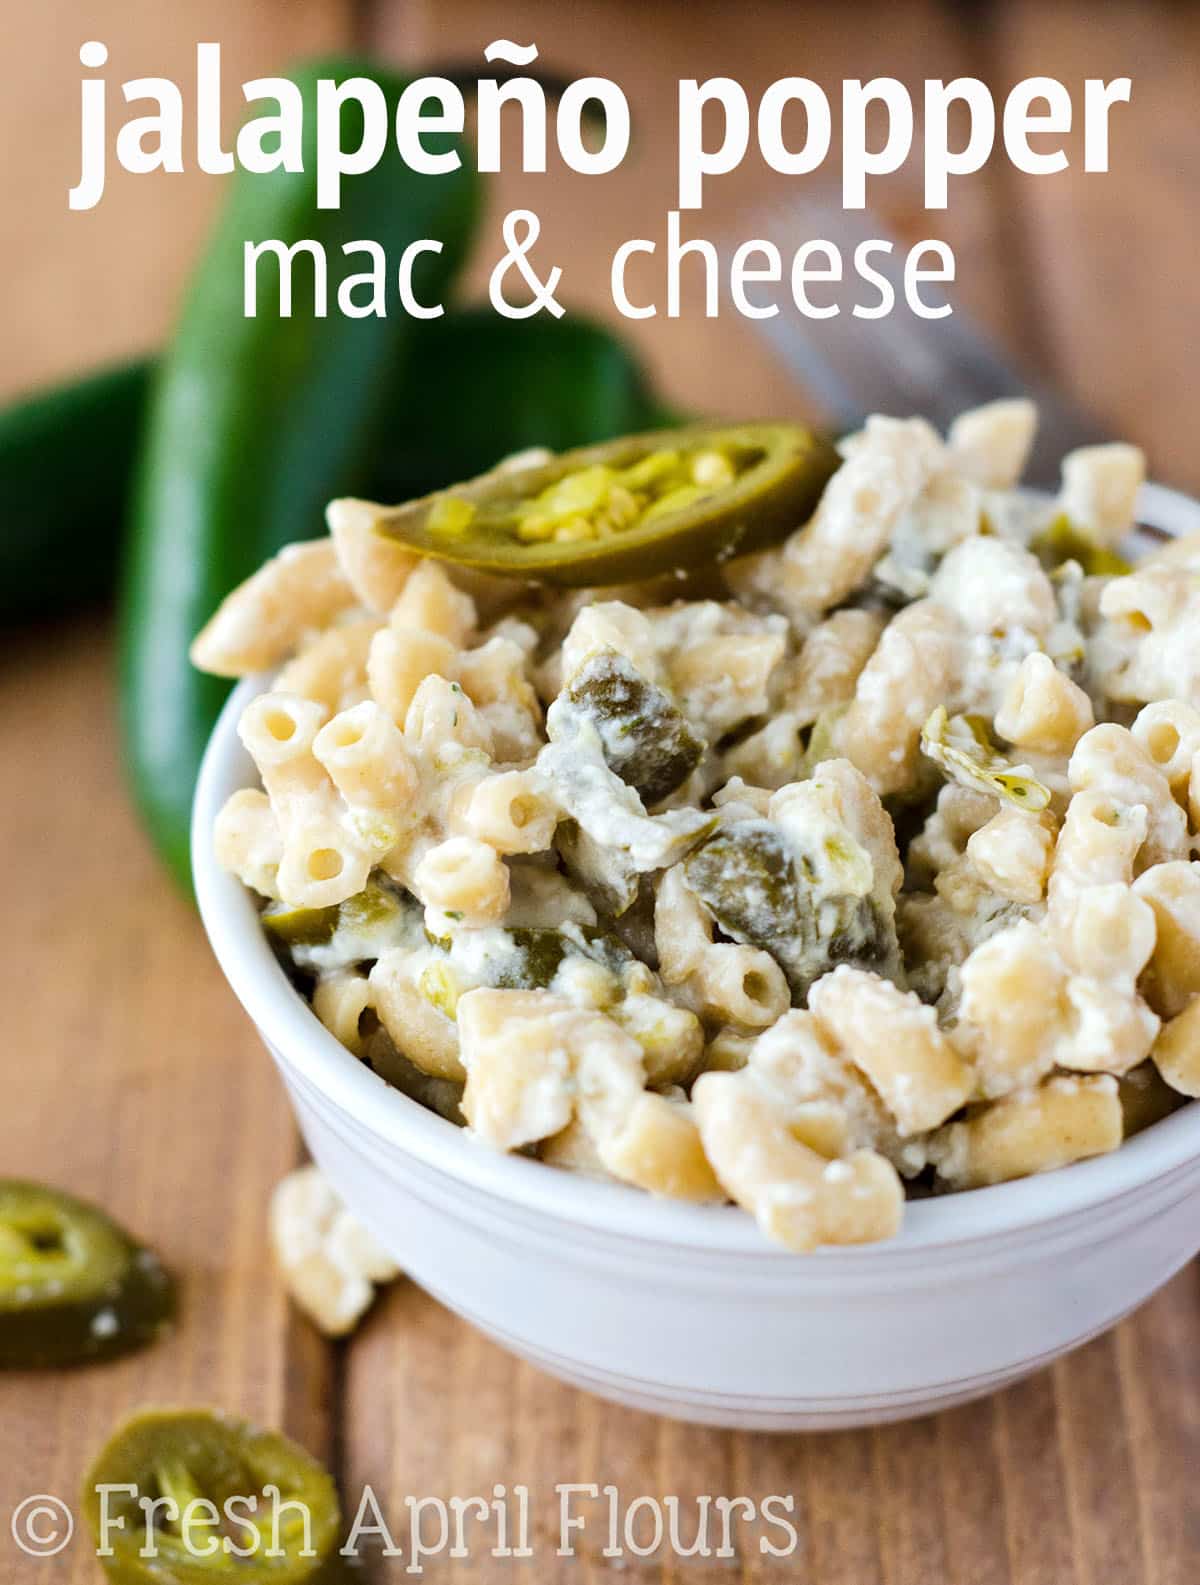 Jalapeño Popper Mac & Cheese: A quick and easy homemade macaroni and cheese filled with spicy jalapeños and green chiles. via @frshaprilflours